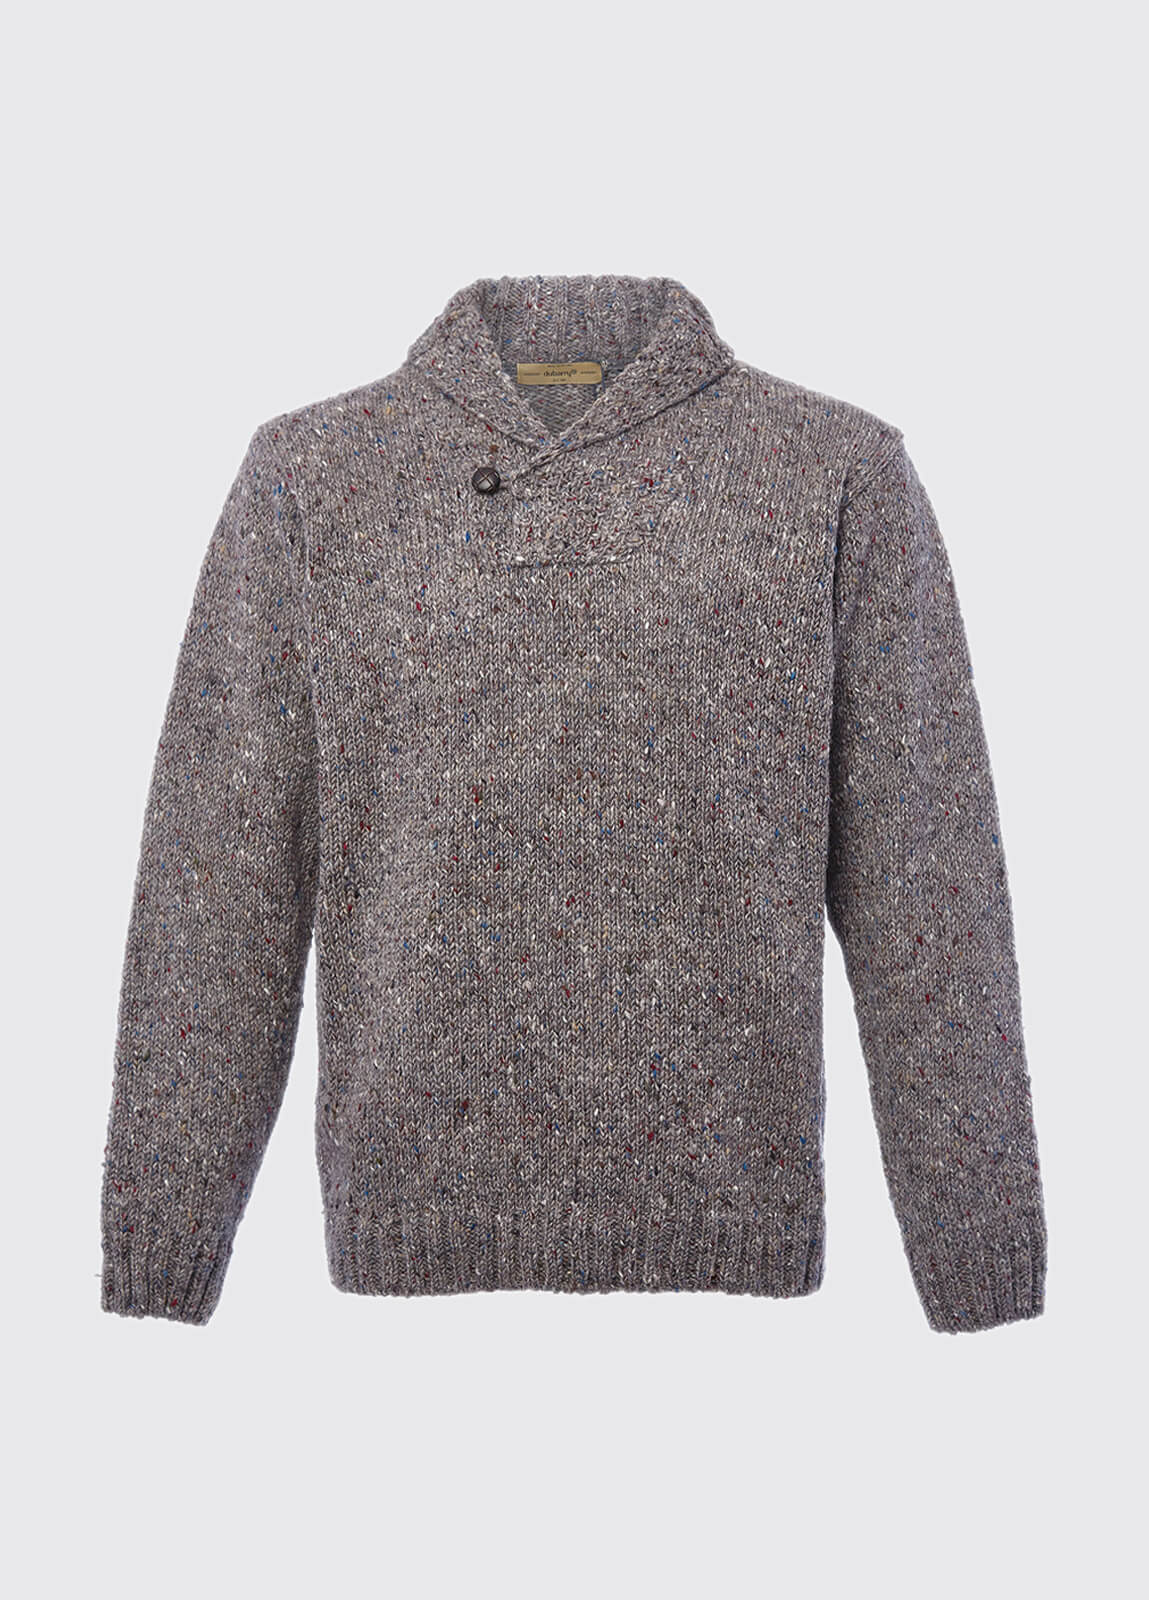 Moriarty sweater - Light Grey